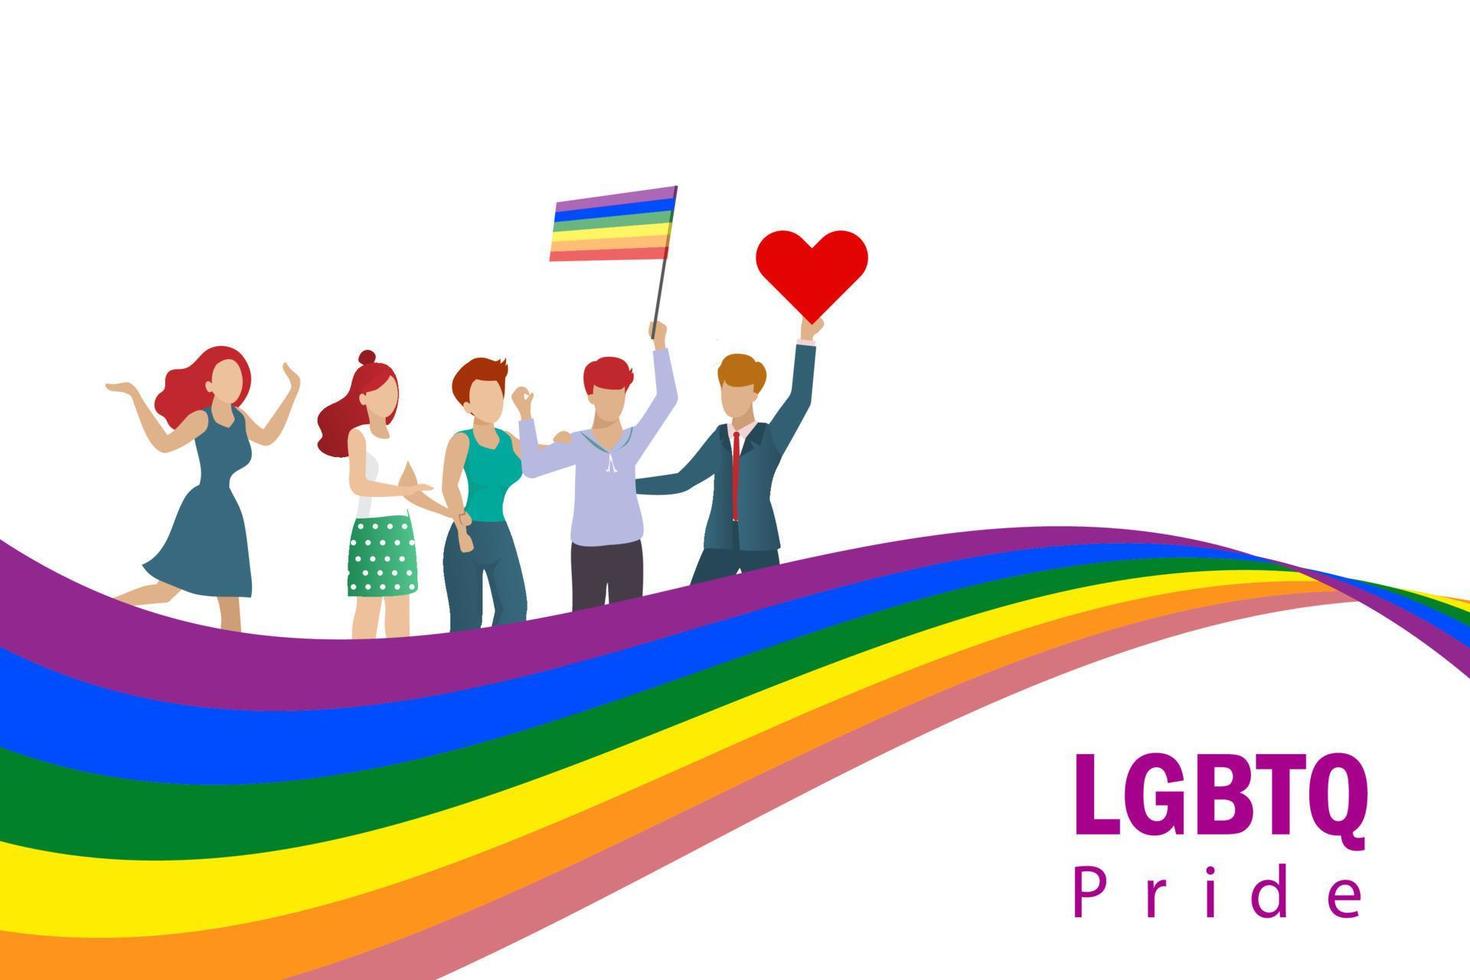 Diverse people with LGBT rainbow flag celebrate LGBTQ pride month holding flag and heart sign. vector